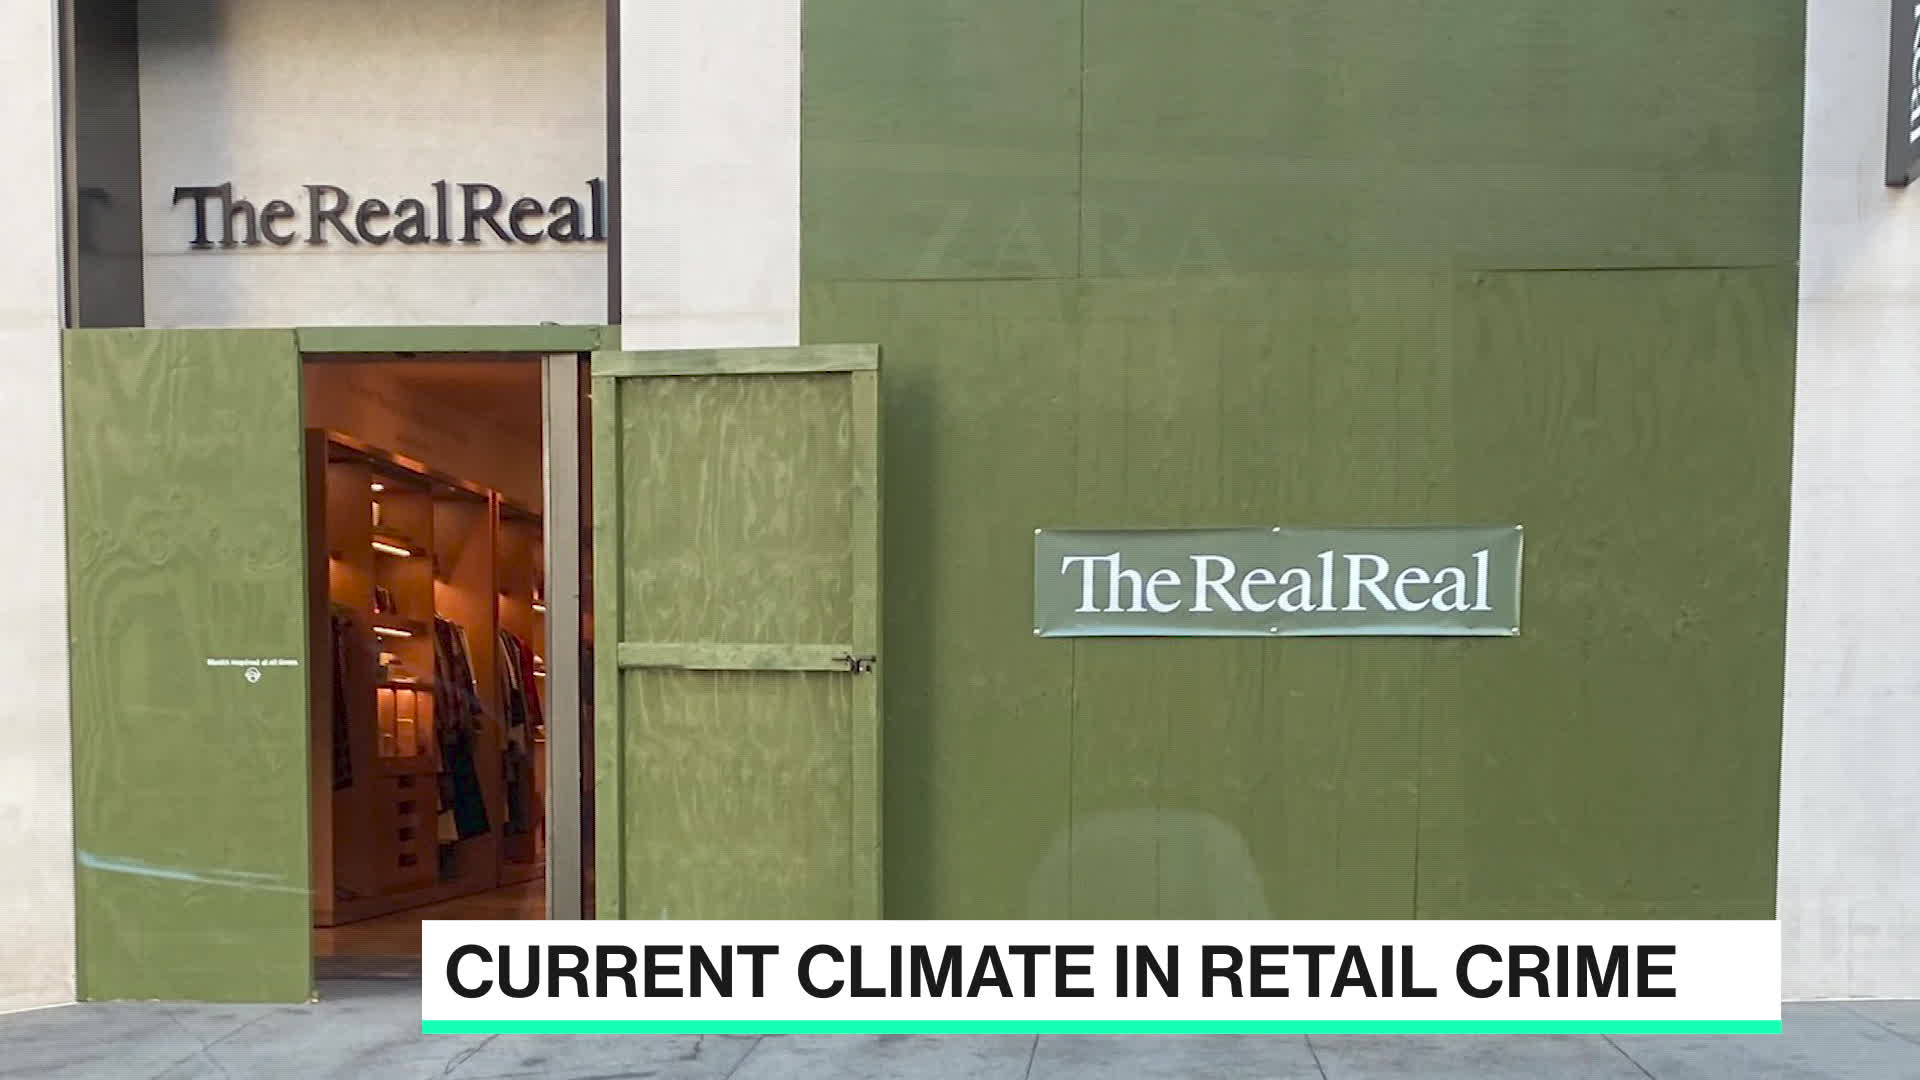 The RealReal CEO on Shopping Trends, Retail Thefts